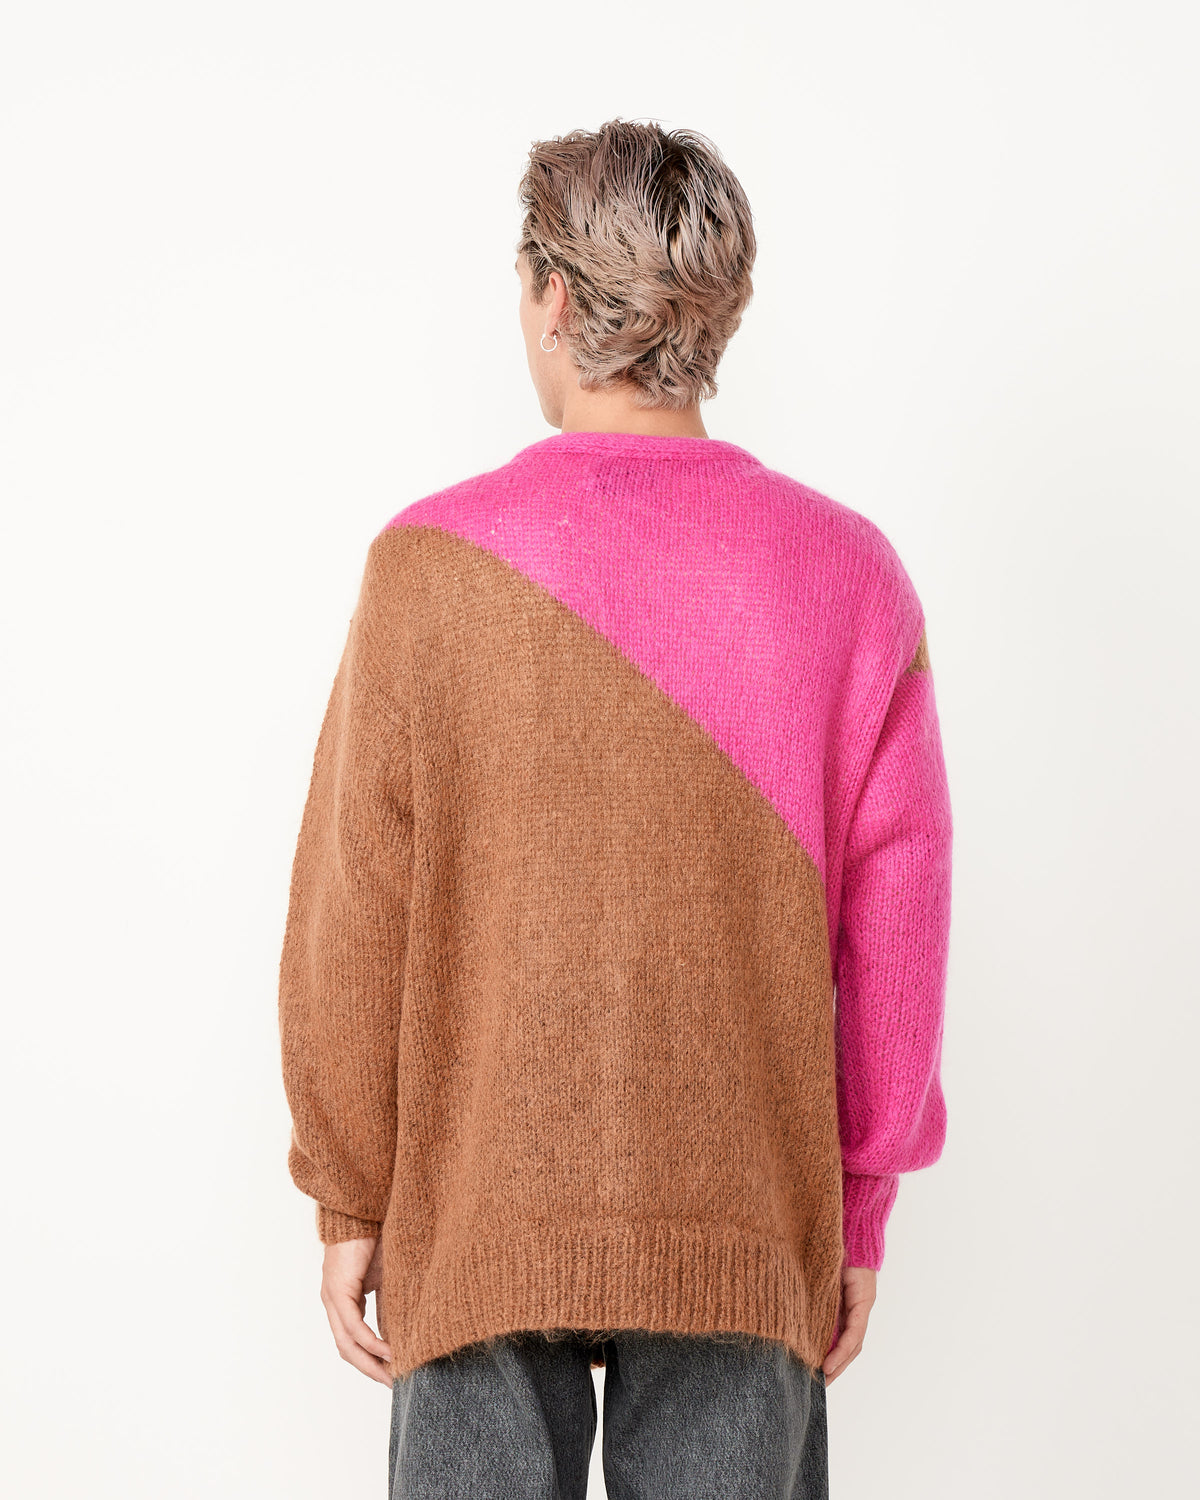 Find Hand Knitted Mohair Cardigan NOMA t.d. now and save money